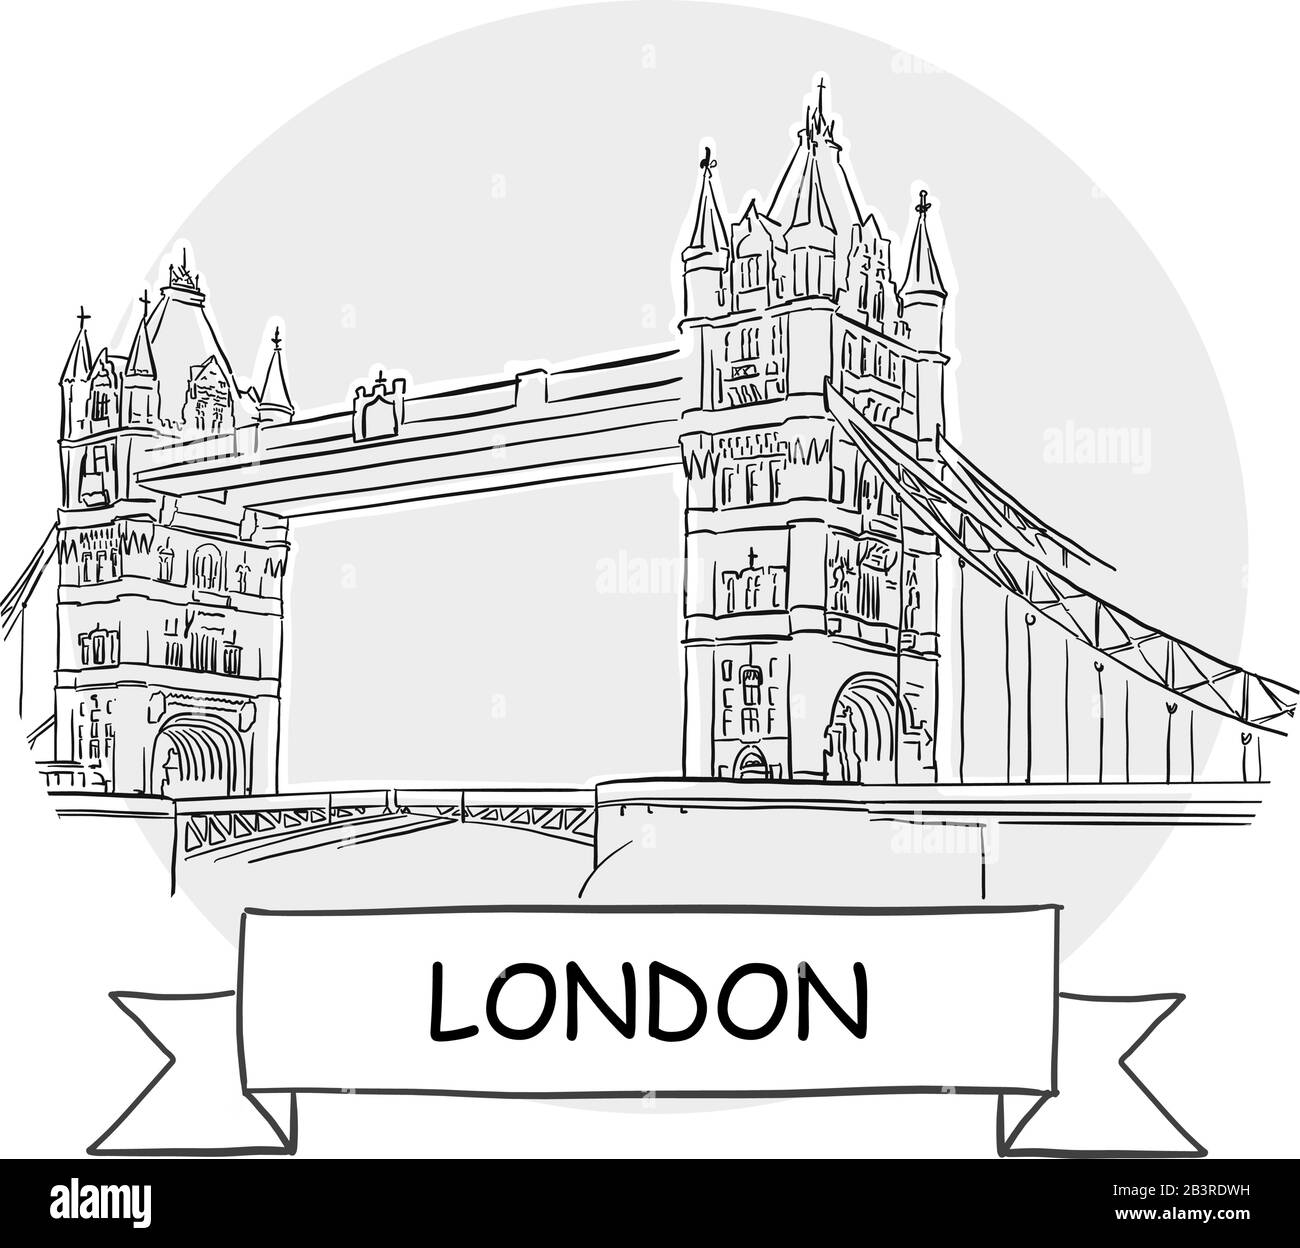 London Hand-Drawn Urban Vector Sign. Black Line Art Illustration with Ribbon and Title. Stock Vector